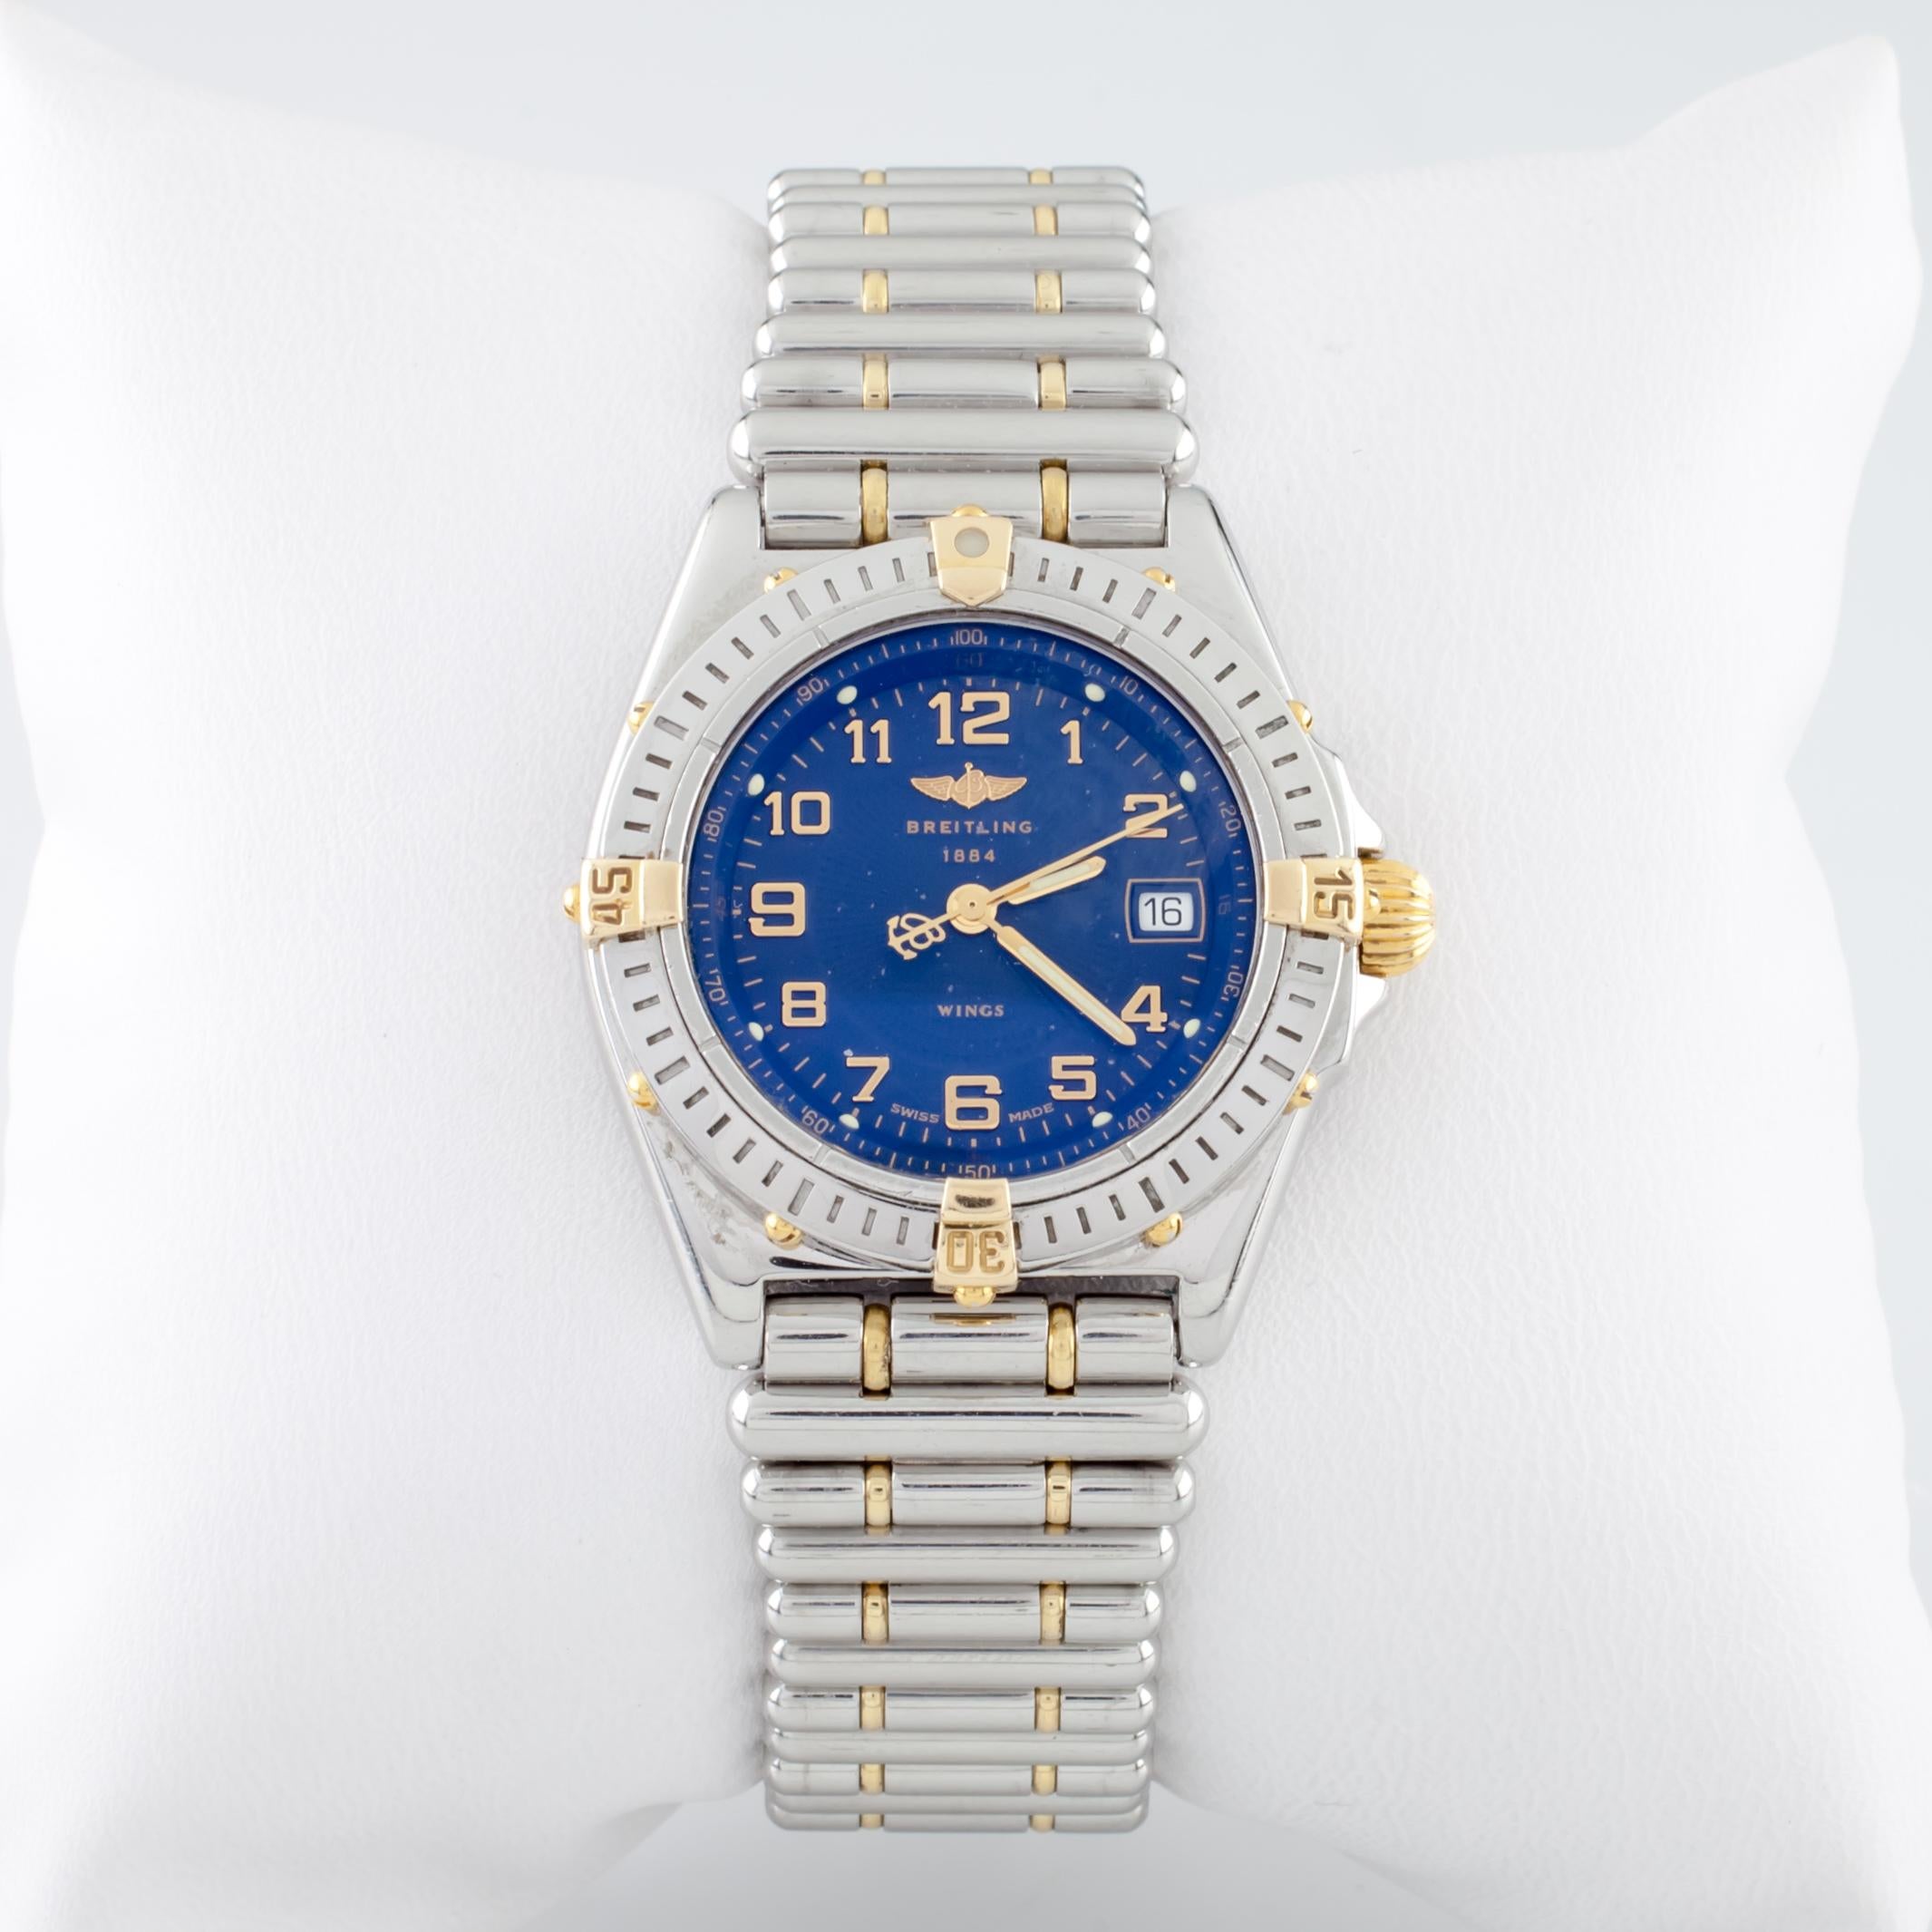 Breitling Women's Two Tone SS 18k Gold Wings Quartz Watch B67350
Model: Wings
Model #B67350
Serial #148904
Calibre B67
Stainless Steel Case w/ SS & 18k Yellow Gold Rotating Bezel
30 mm in Diameter (33 mm w/ Crown)
Lug-to-Lug Distance = 35